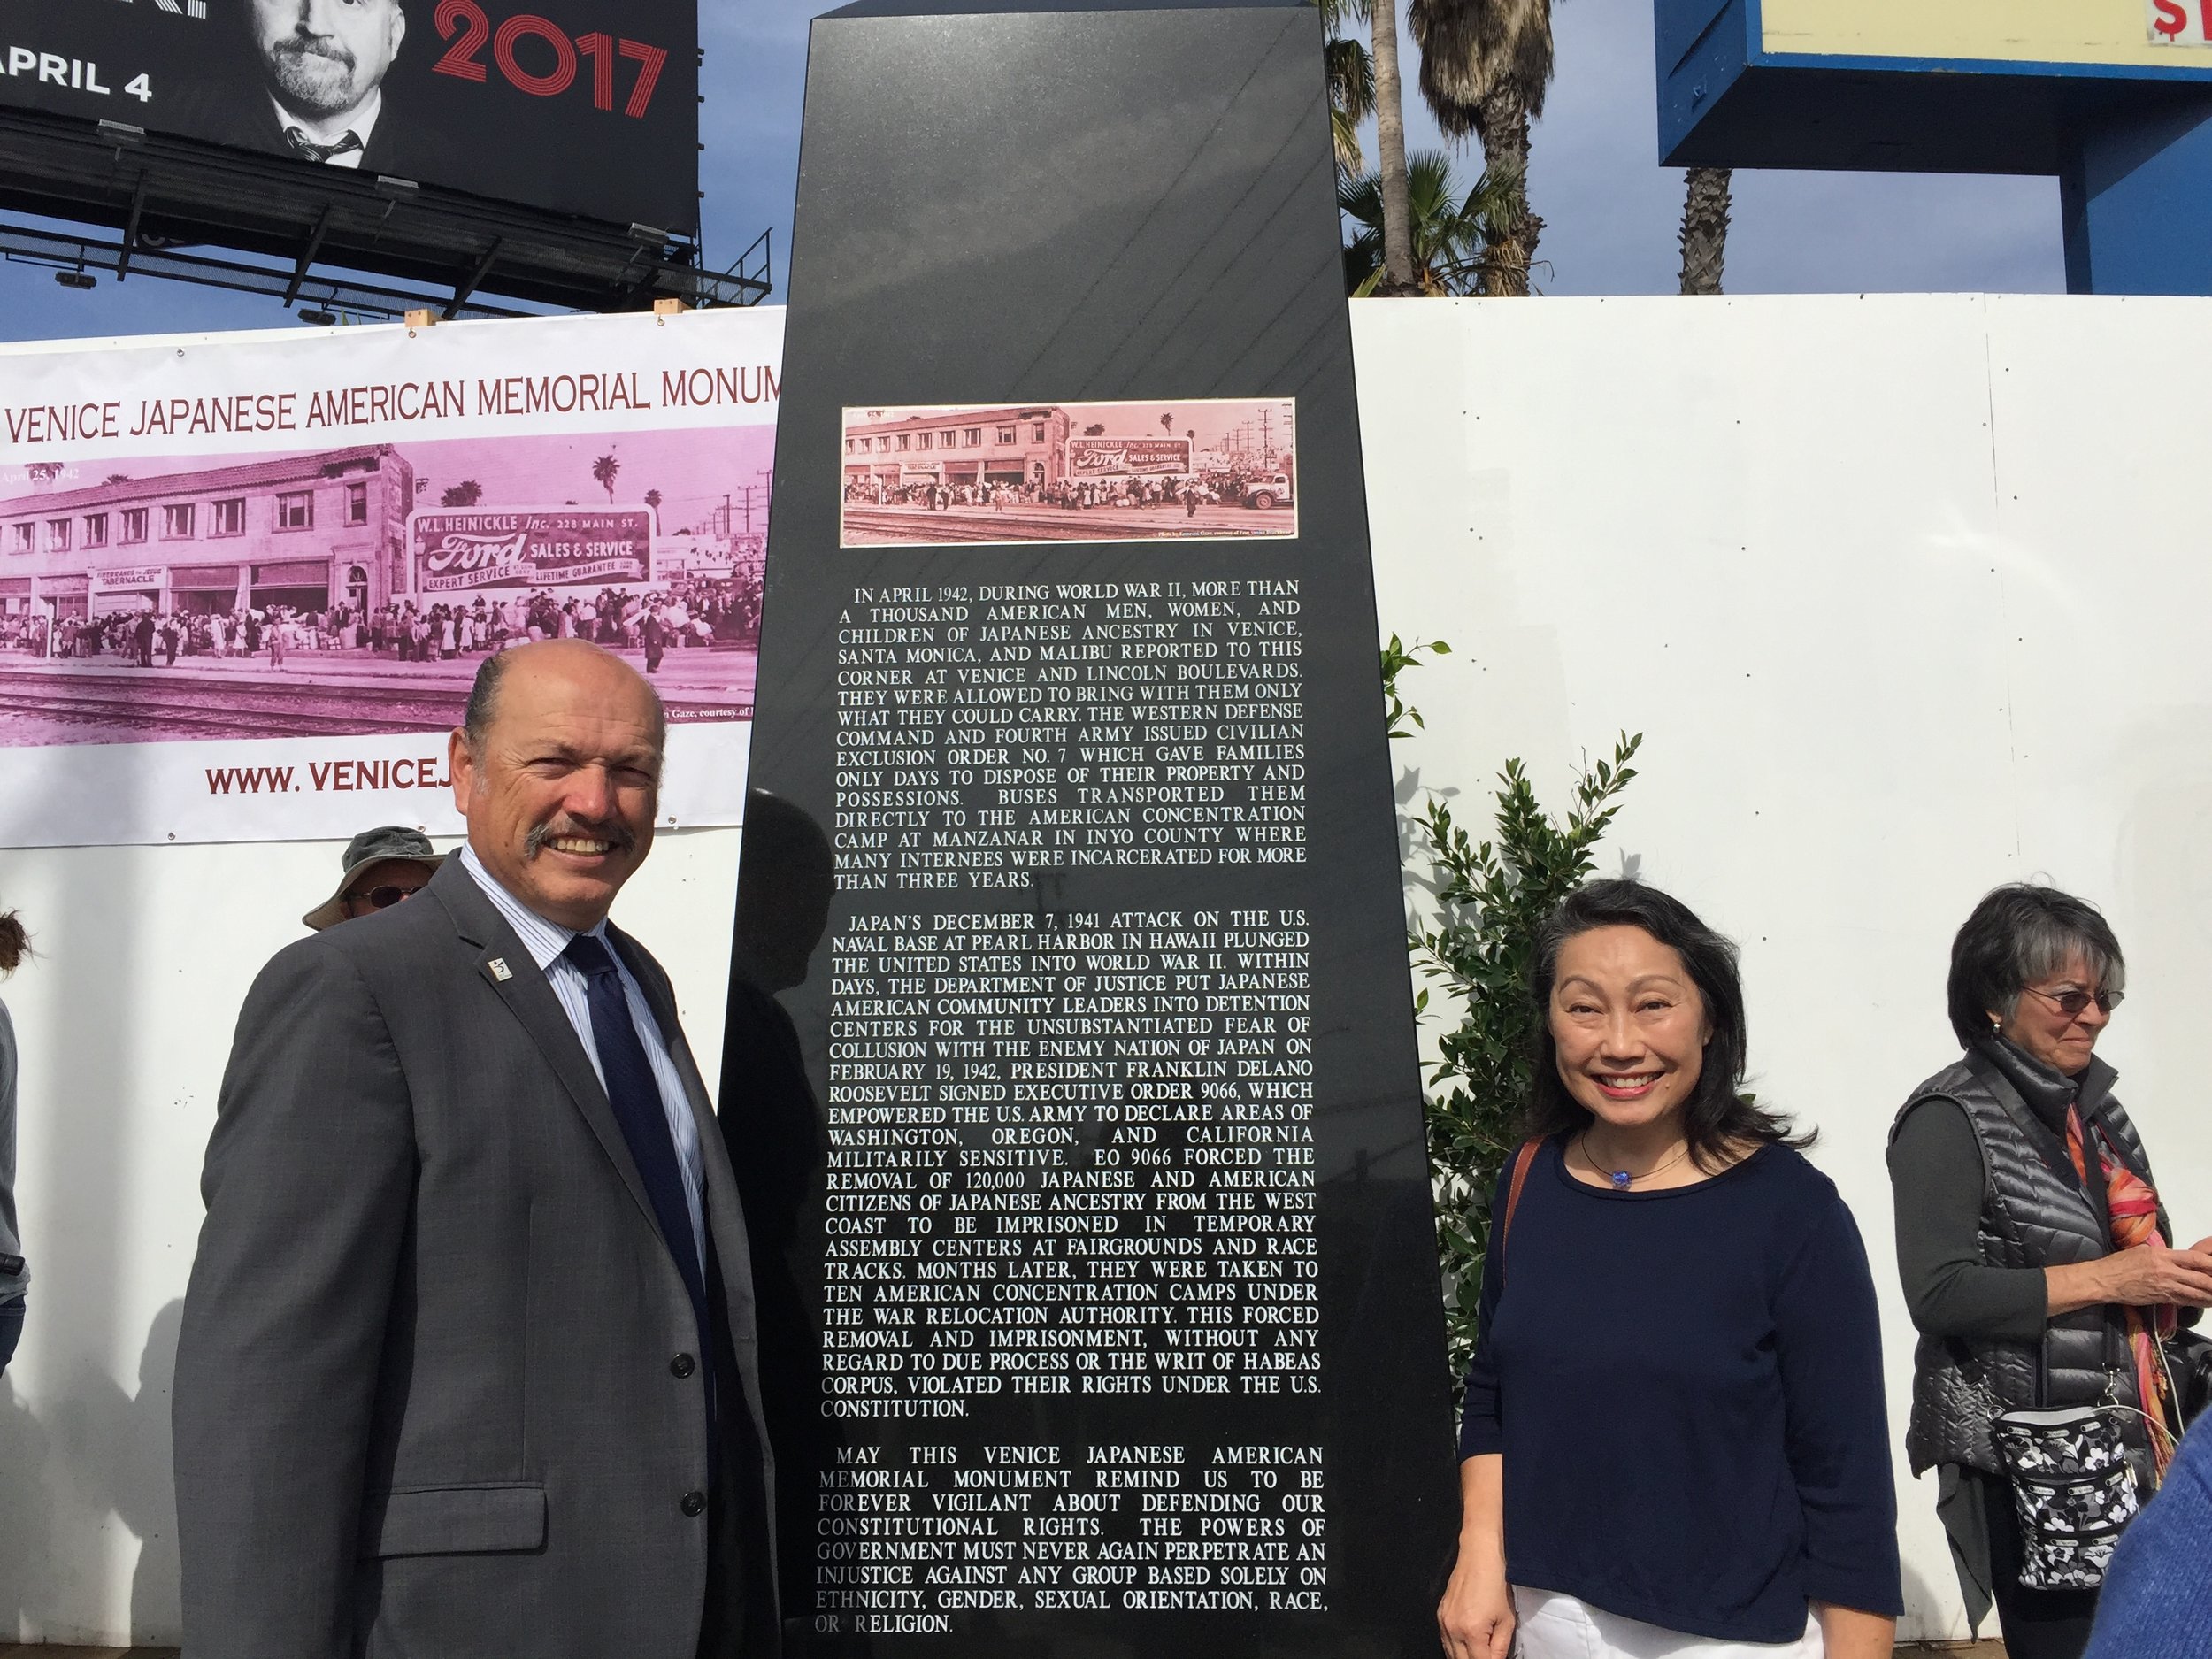 Tony at the dedication of the Japanese American Memorial in Venice, CA